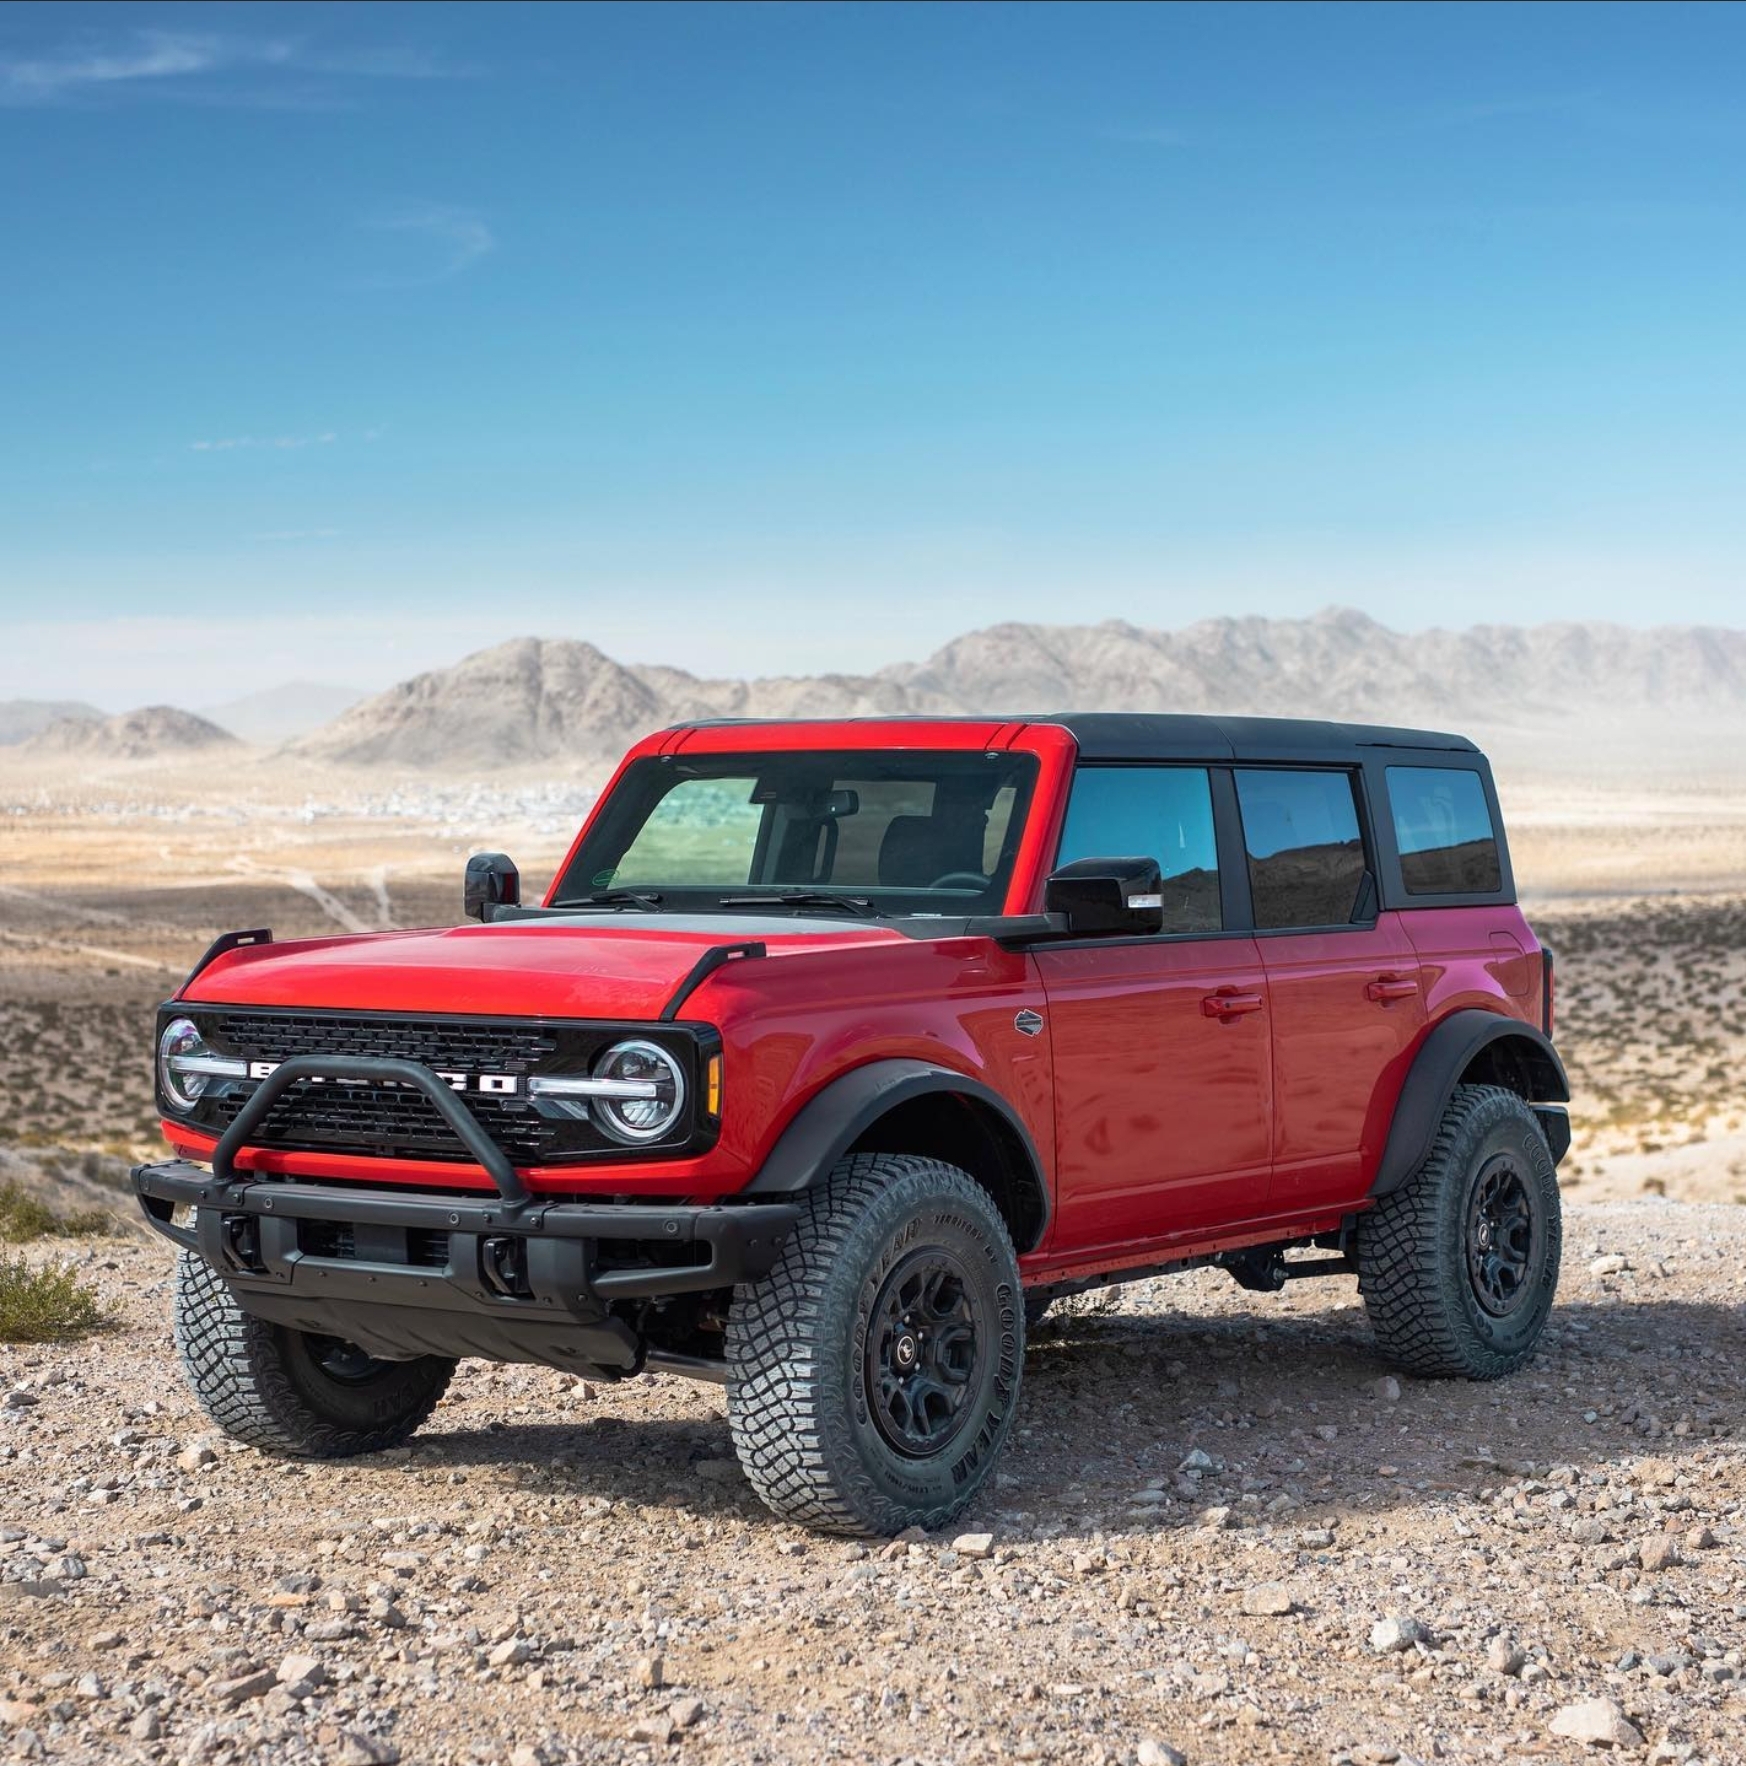 Ford Bronco First Look: 2022 Bronco in Hot Pepper Red screenshot_20210910-220440_instagram-